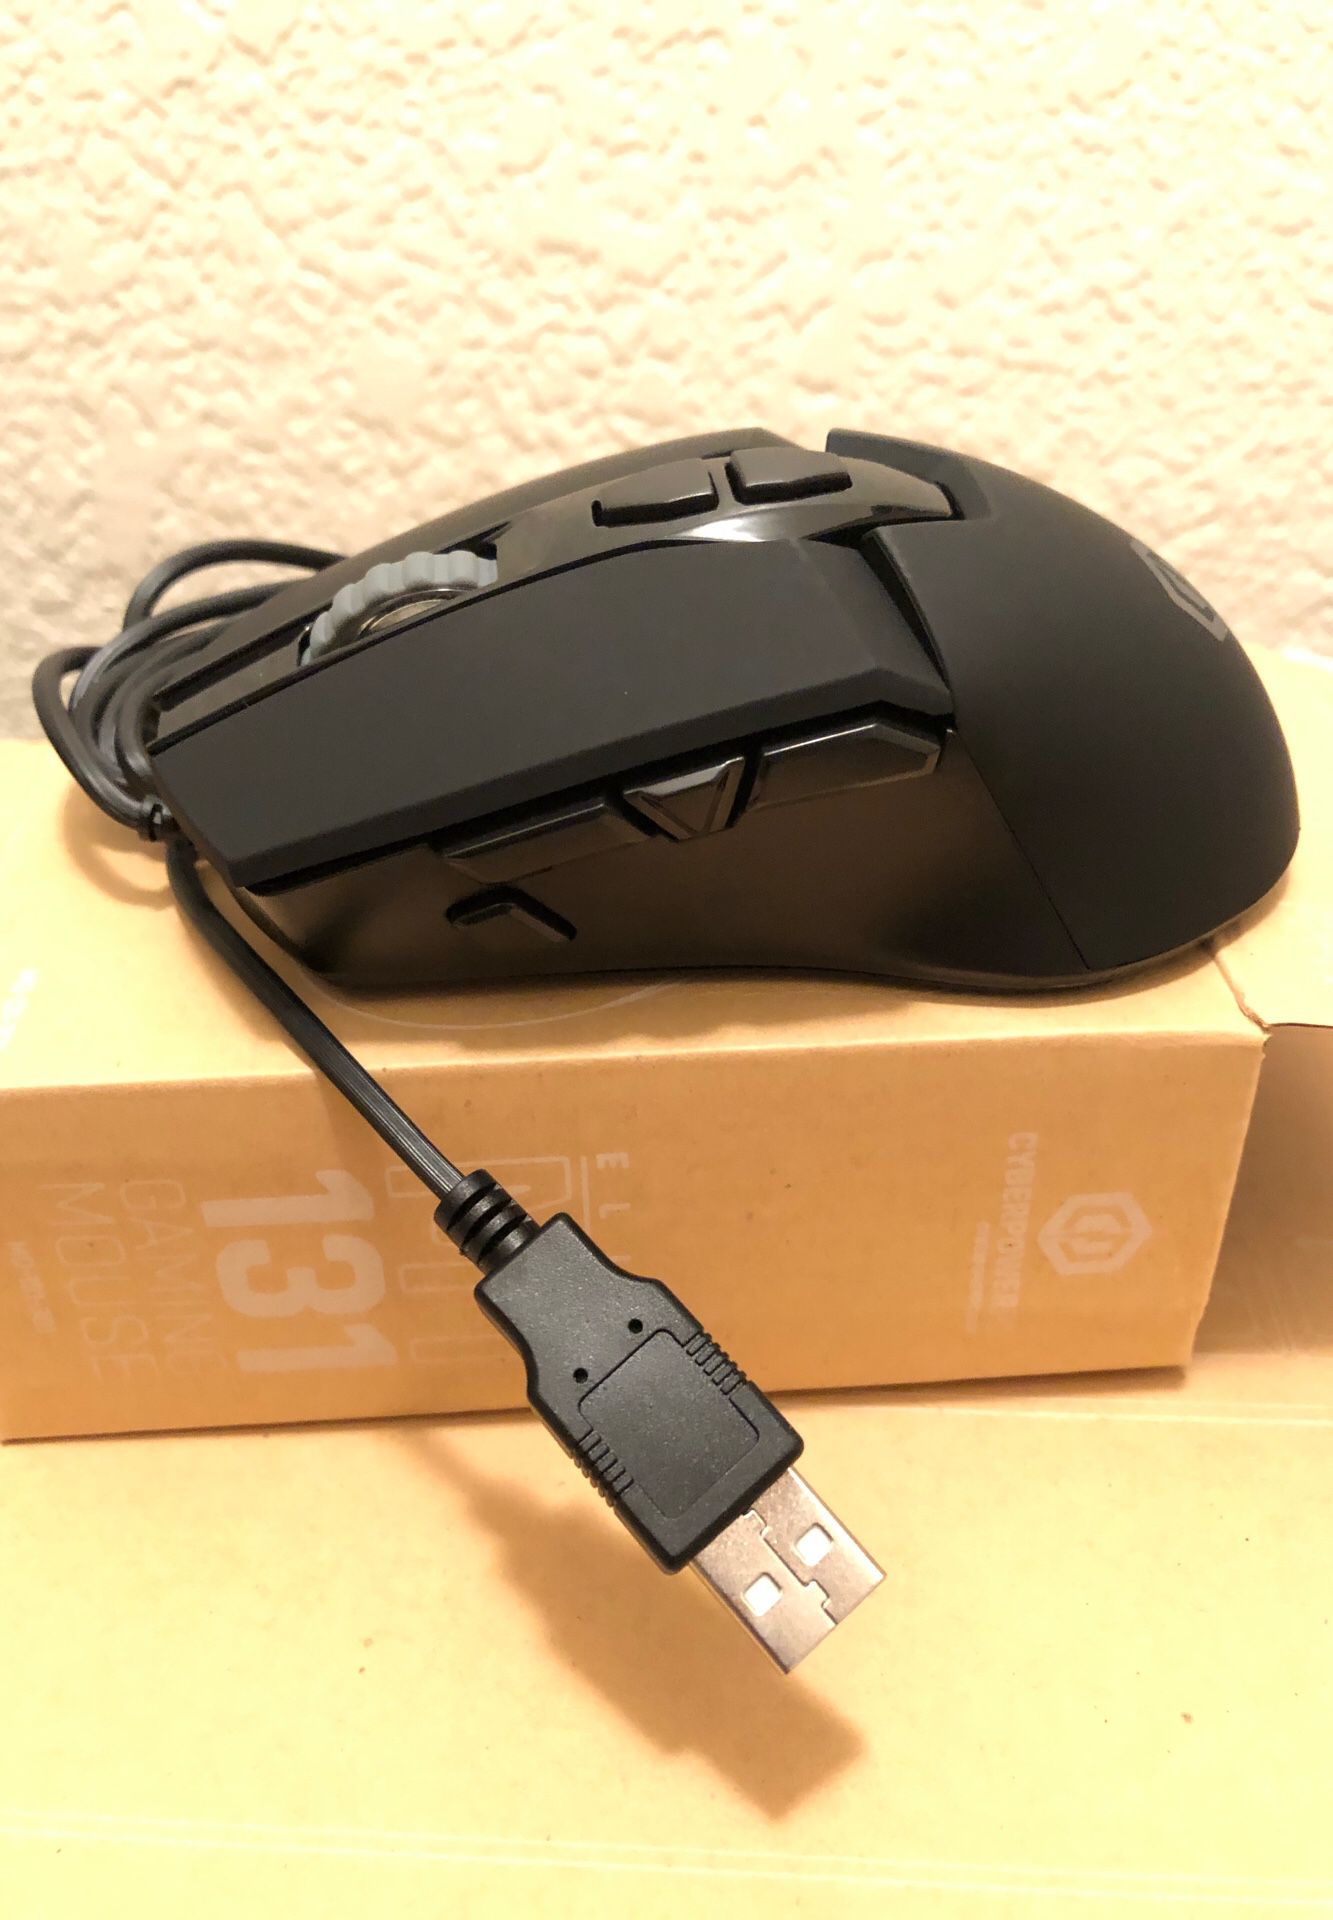 cyberpower mouse rgb software